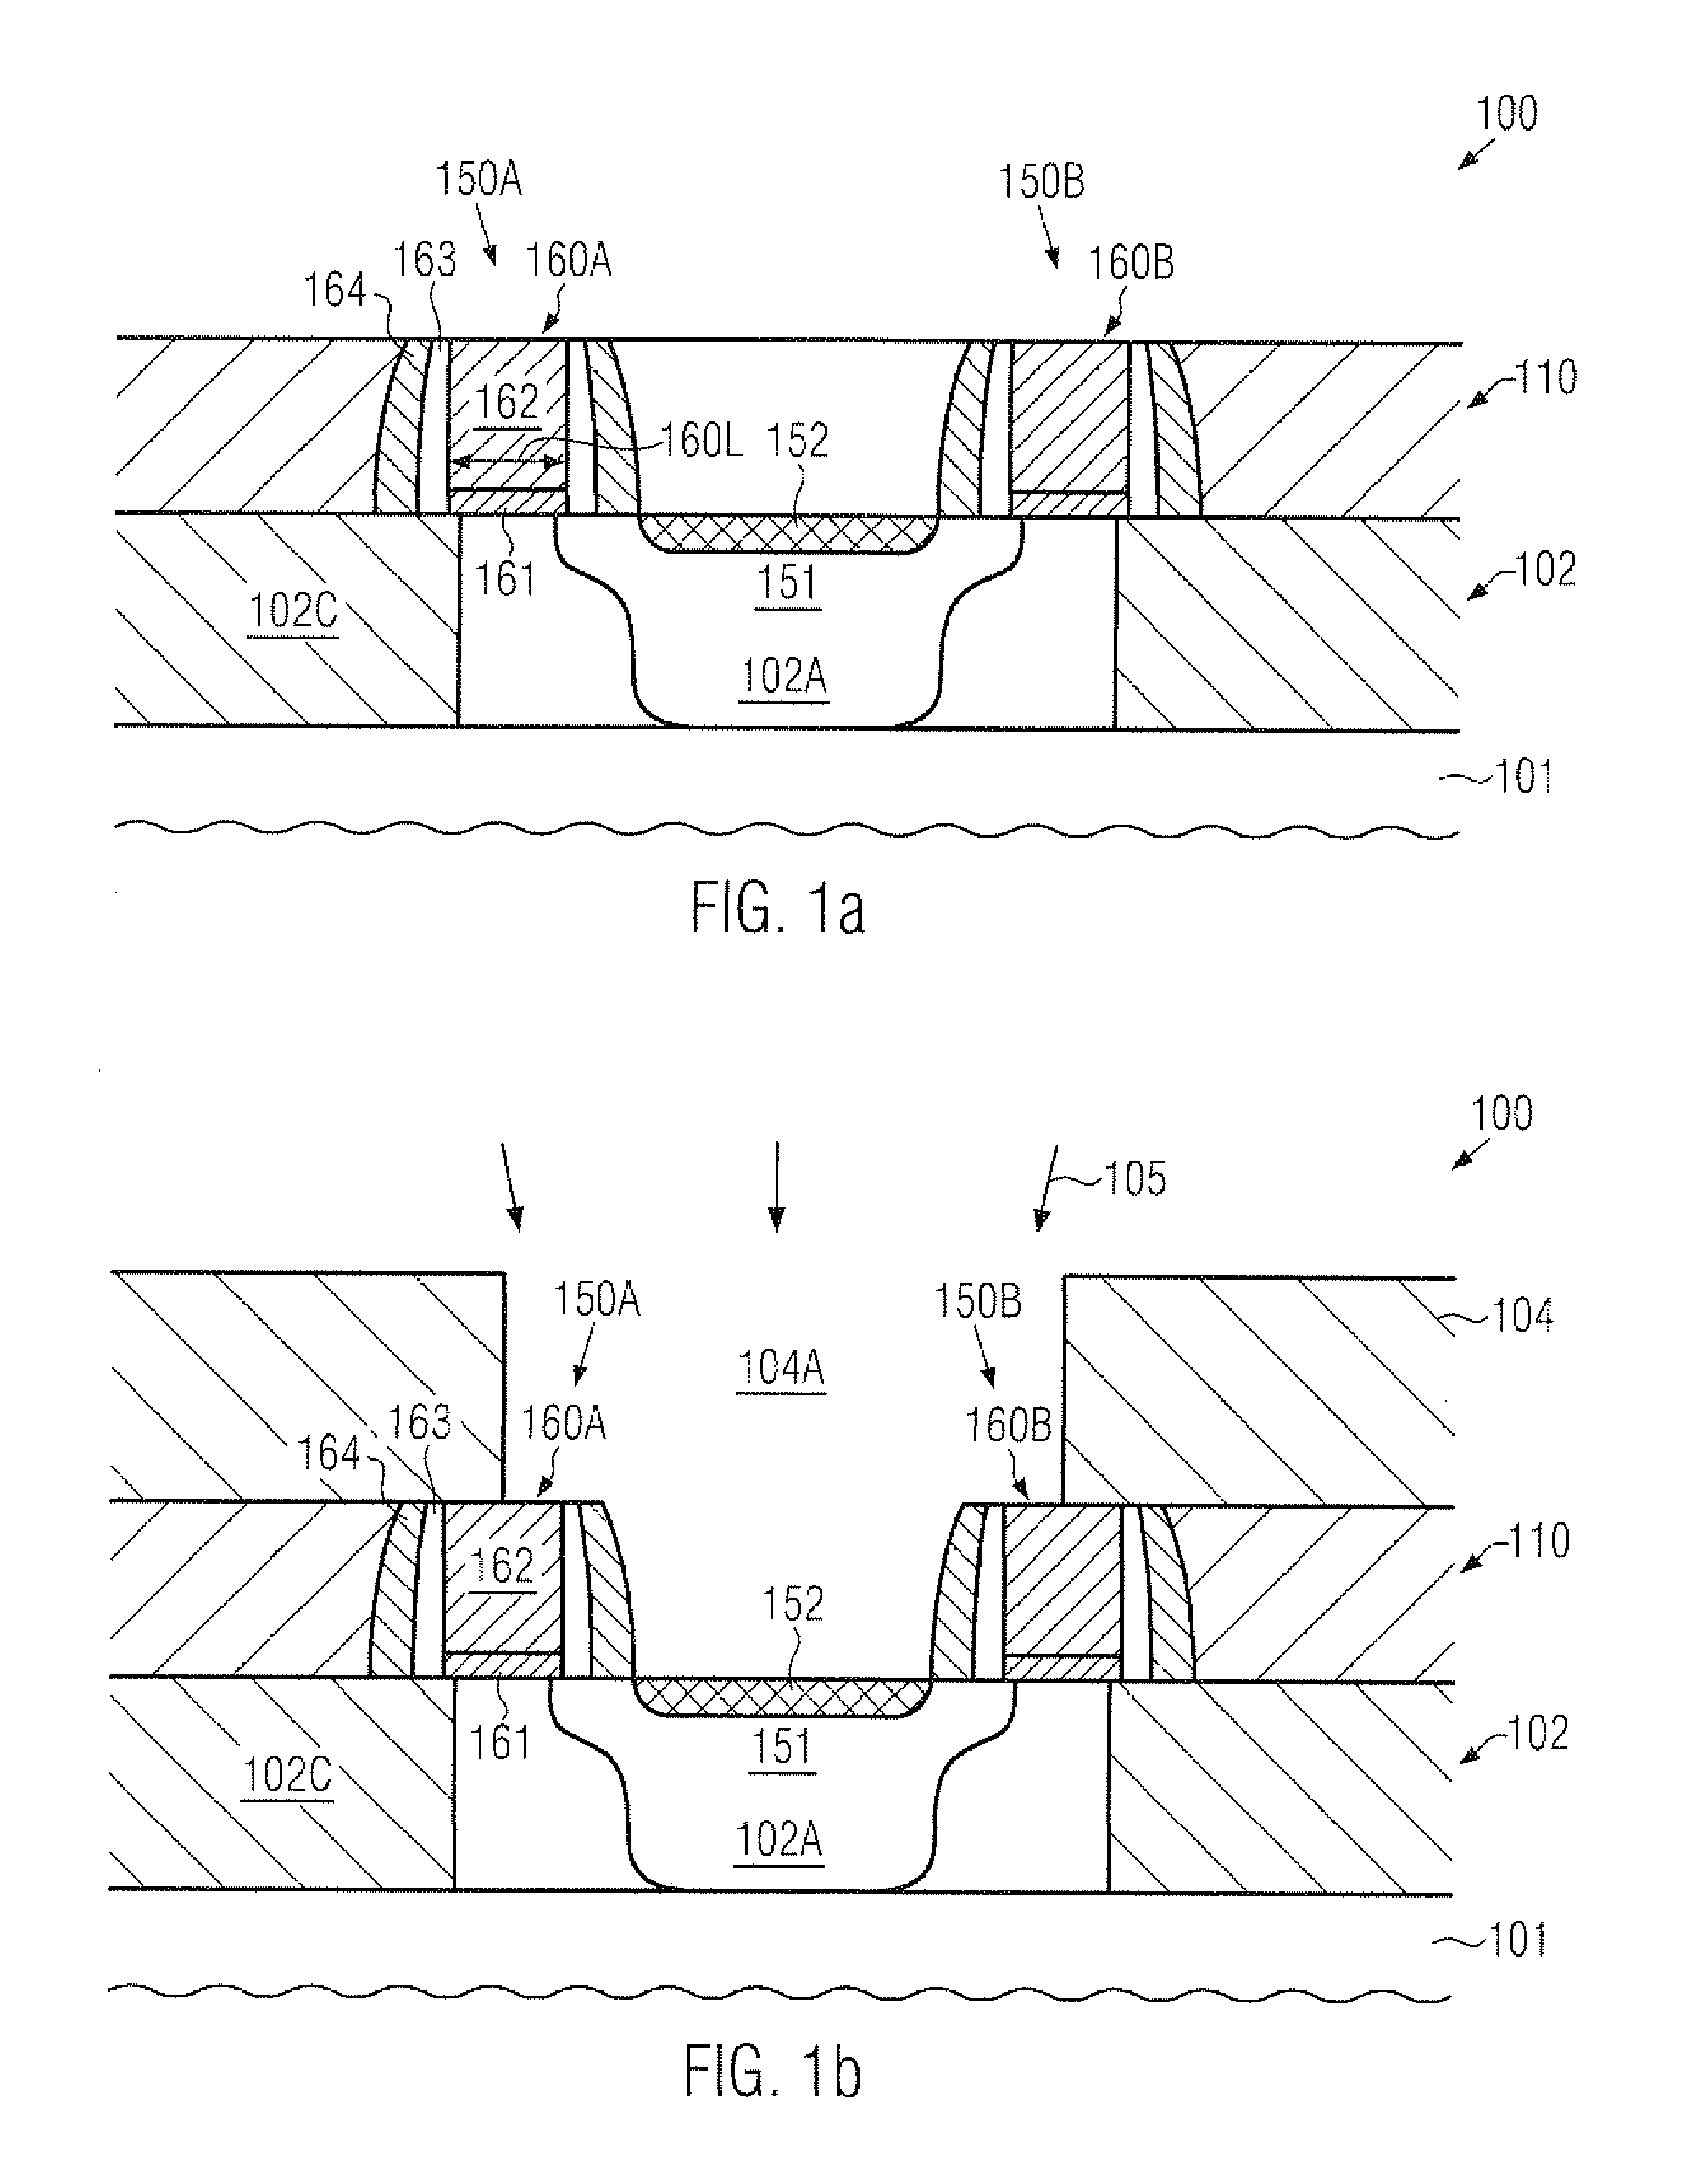 Contact bars with reduced fringing capacitance in a semiconductor device